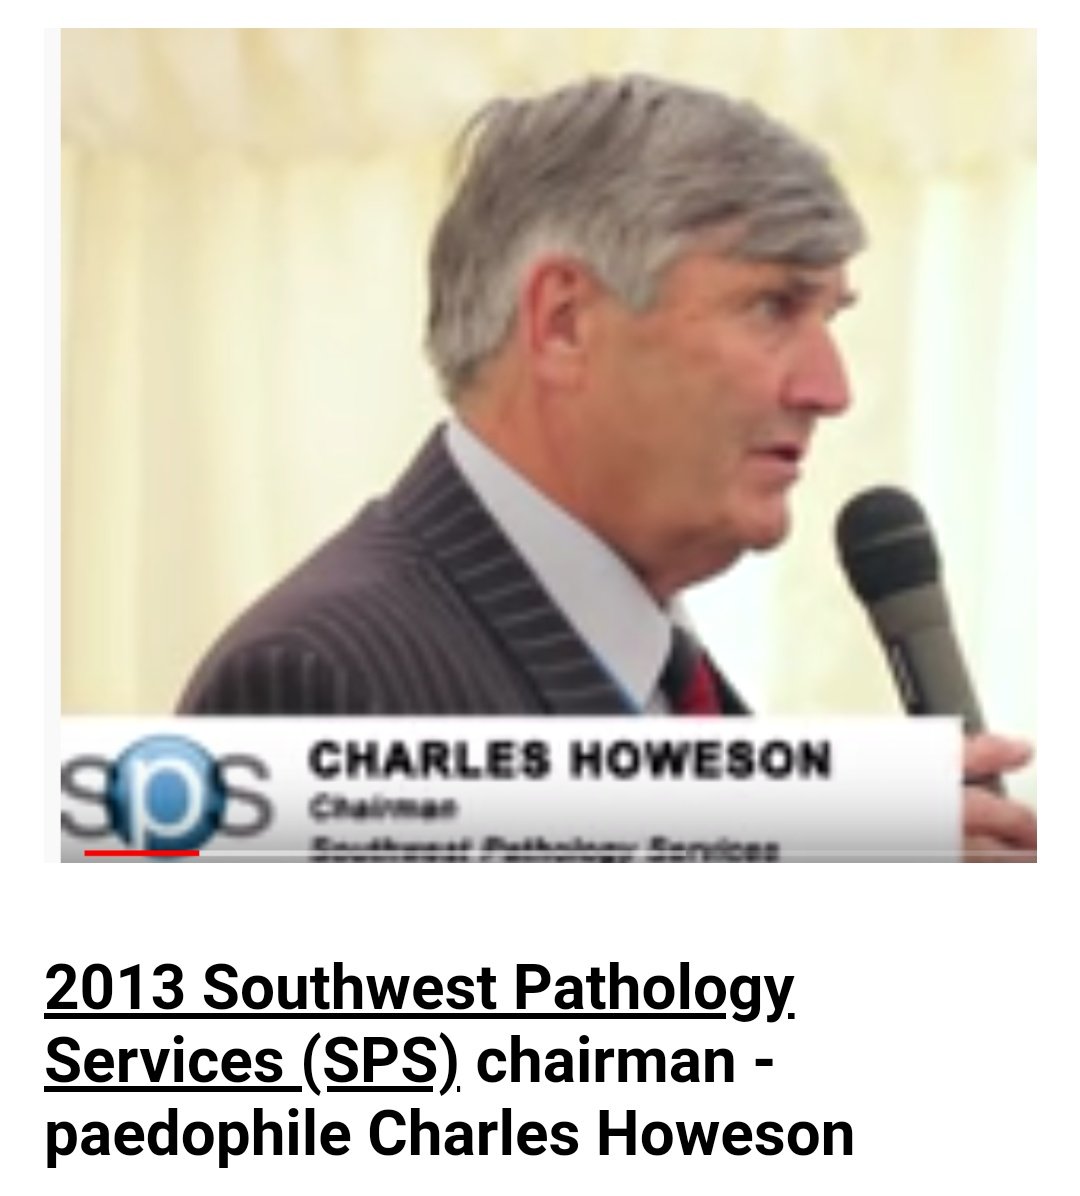 The convicted millionaire sex offender Charles Howeson, friend of BigEars and defended in court by Daniel Janner, son of paedophile Greville Janner, was chairman of Southwest Pathology Services. ... https://www.plymouthherald.co.uk/news/plymouth-news/judge-rules-millionaire-sex-offender-2150746